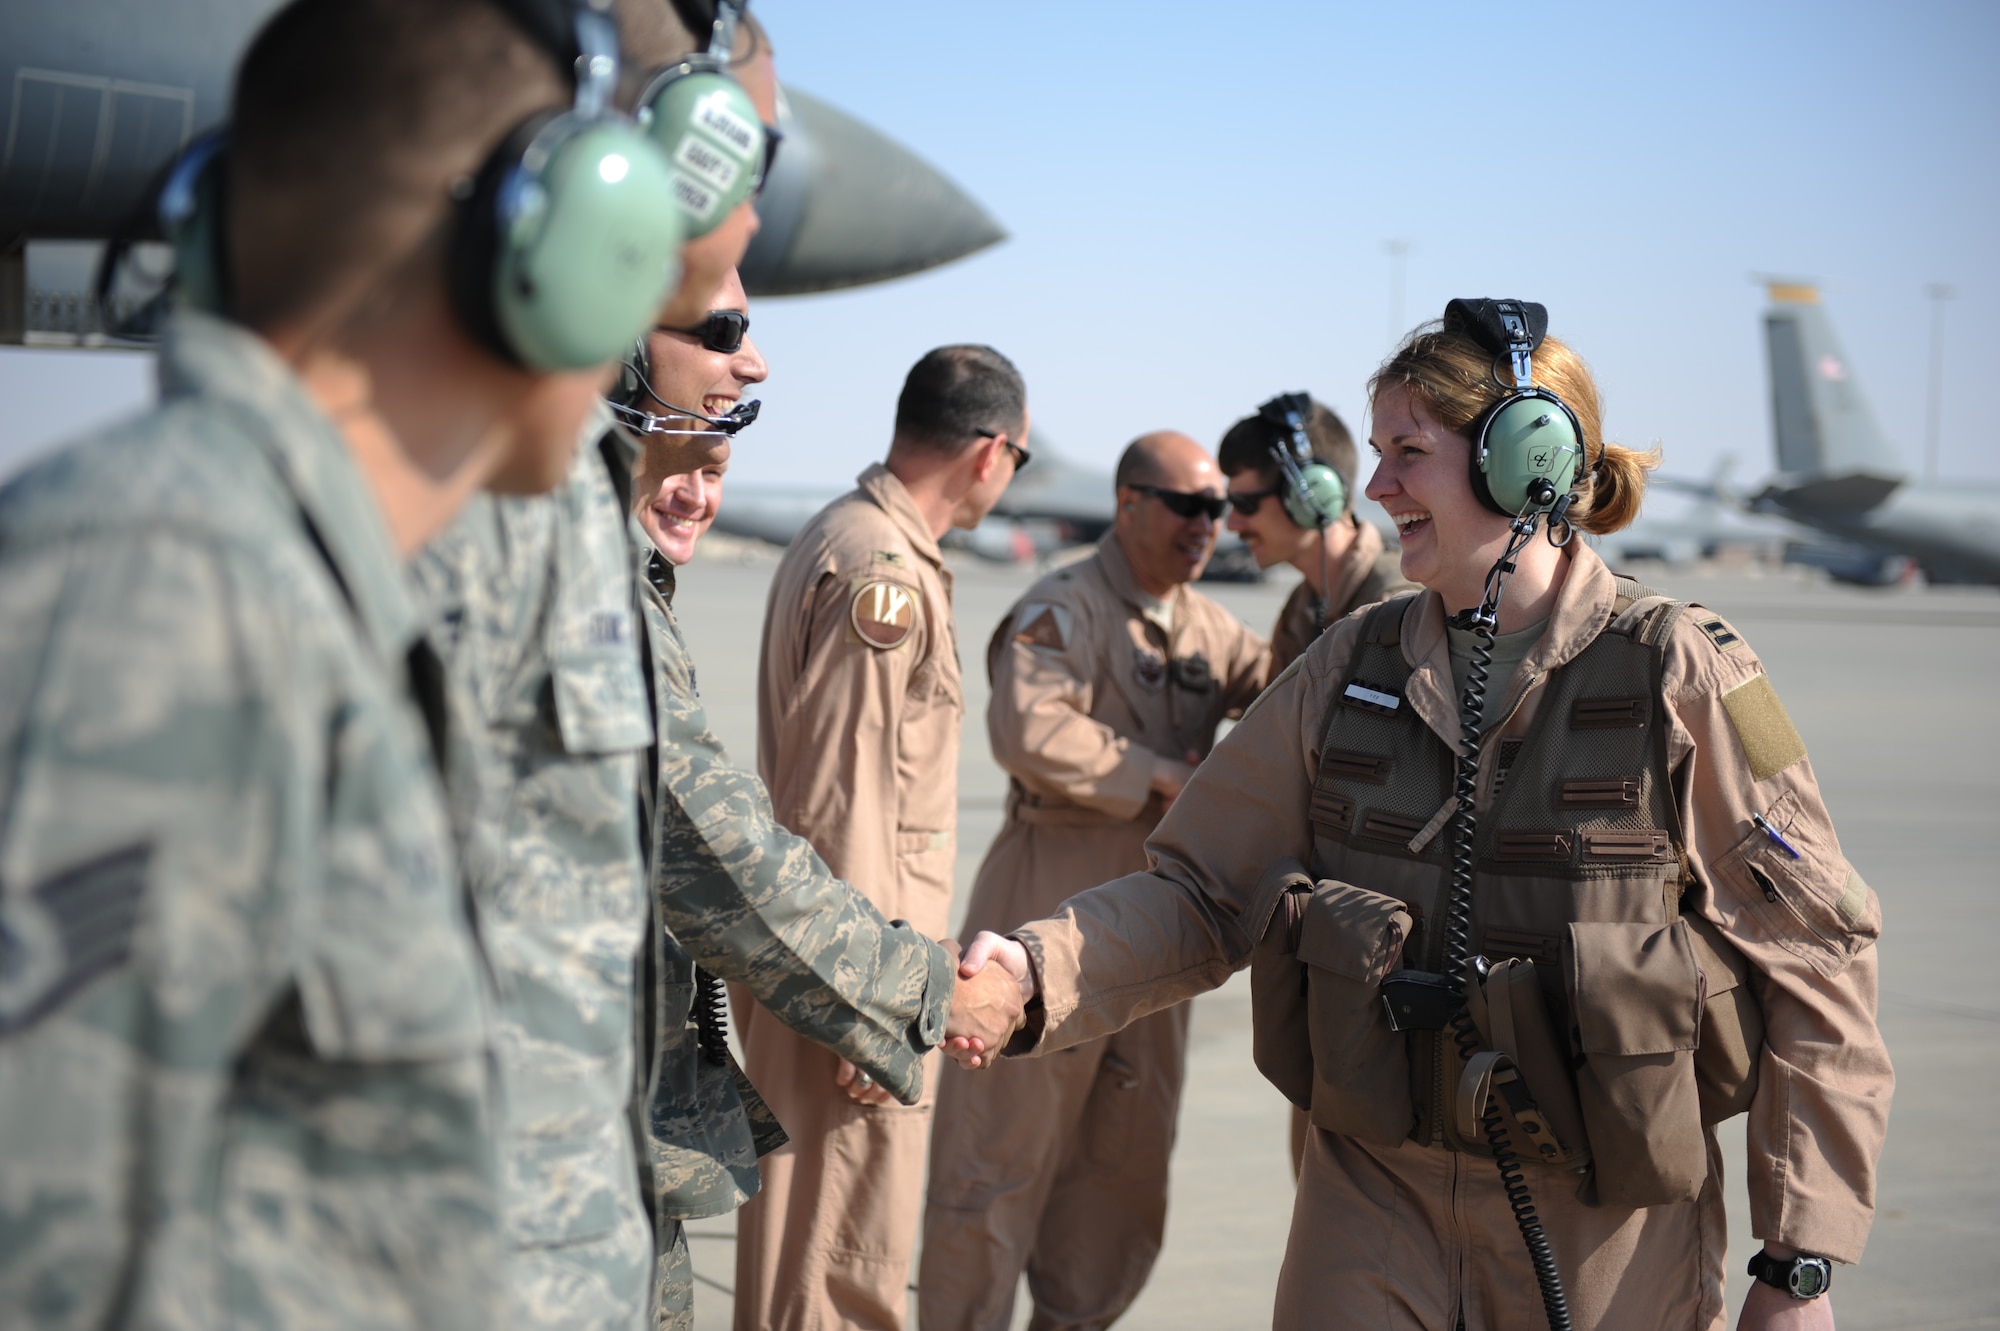 Capt. Laura Hunstock, 9th Expeditionary Bomb Squadron weapon systems officer and native of Bossier City, La., shakes hands with her crew chiefs before the 10,000th combat mission here Feb. 26, 2012. The B-1, or “Bone” as it is affectionately known, performed its first combat mission in December 1998 during Operation Desert Fox.   Several upgrades have been made to the B-1 over the last 30 years in order to make it a highly versatile, multi-mission weapon system.  (U.S. Air Force photo/Staff Sgt. Nathanael Callon)